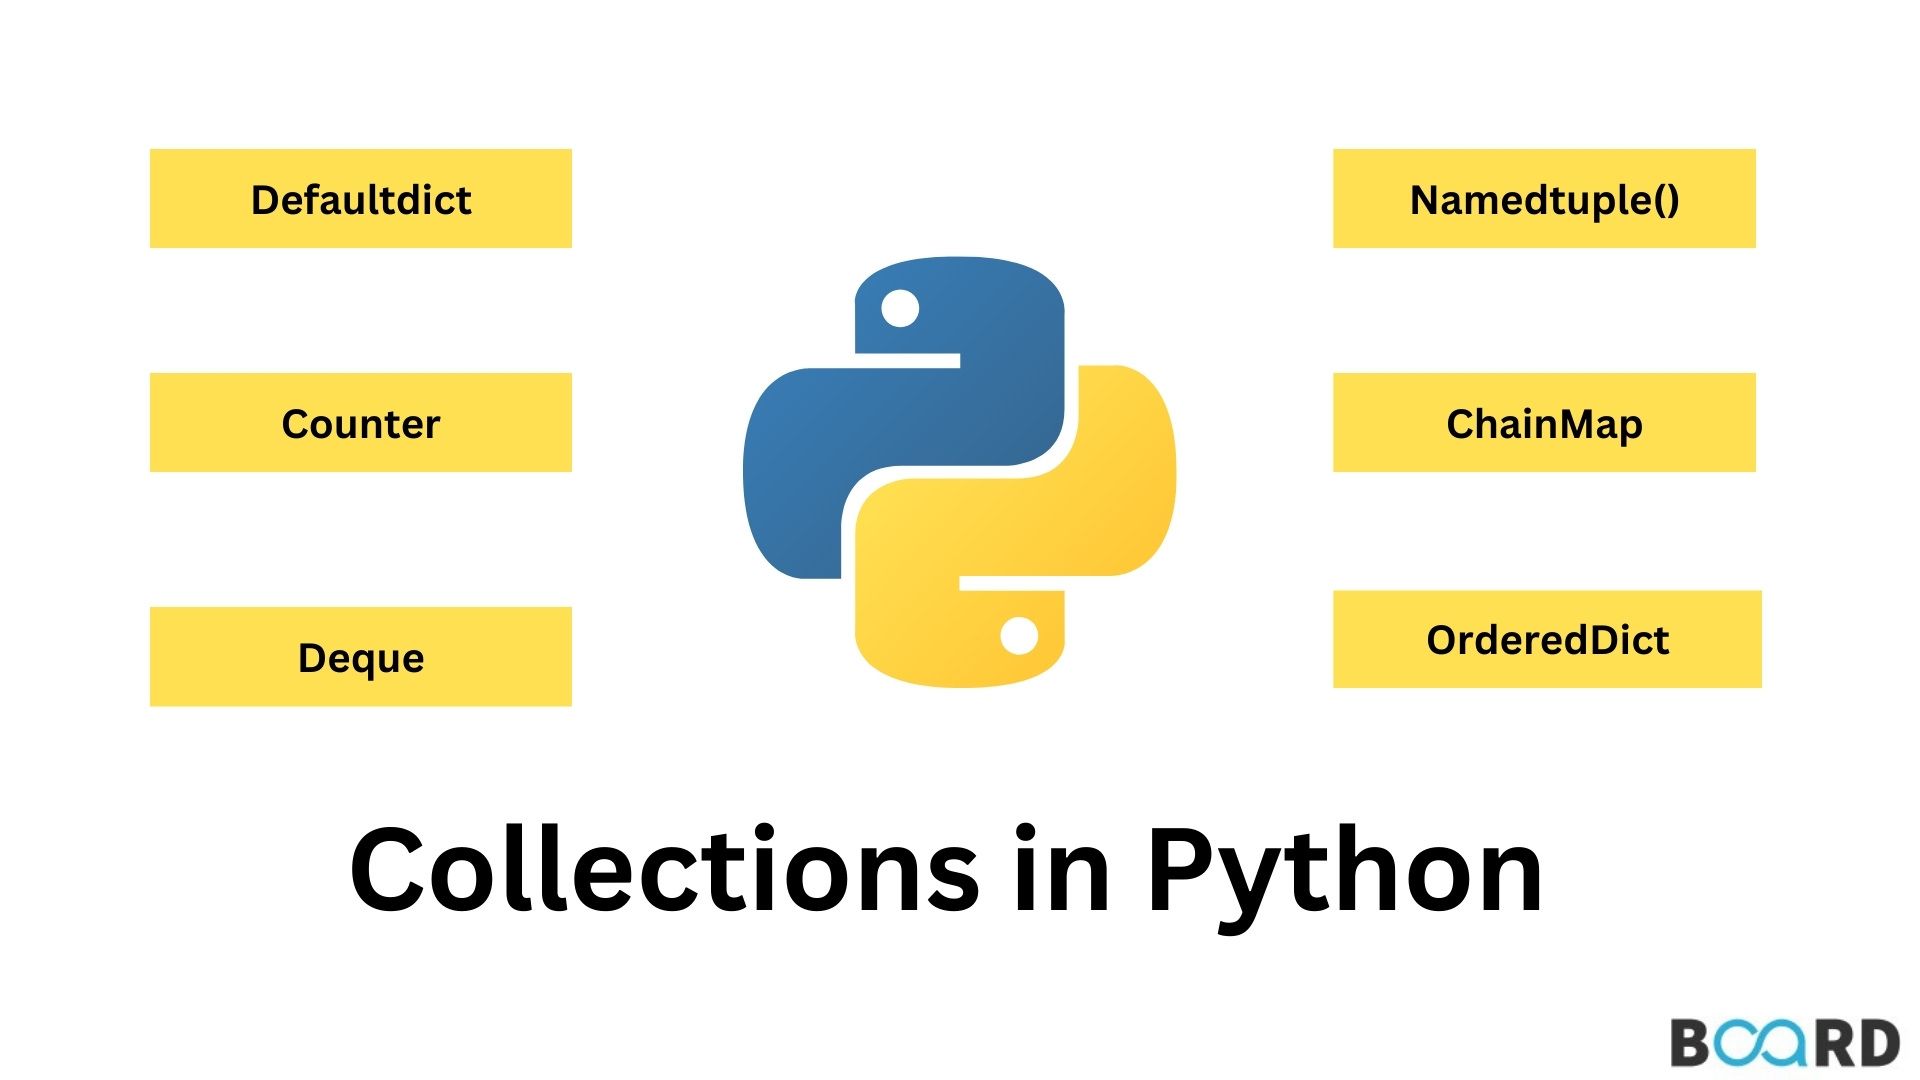 What are Collections in Python?